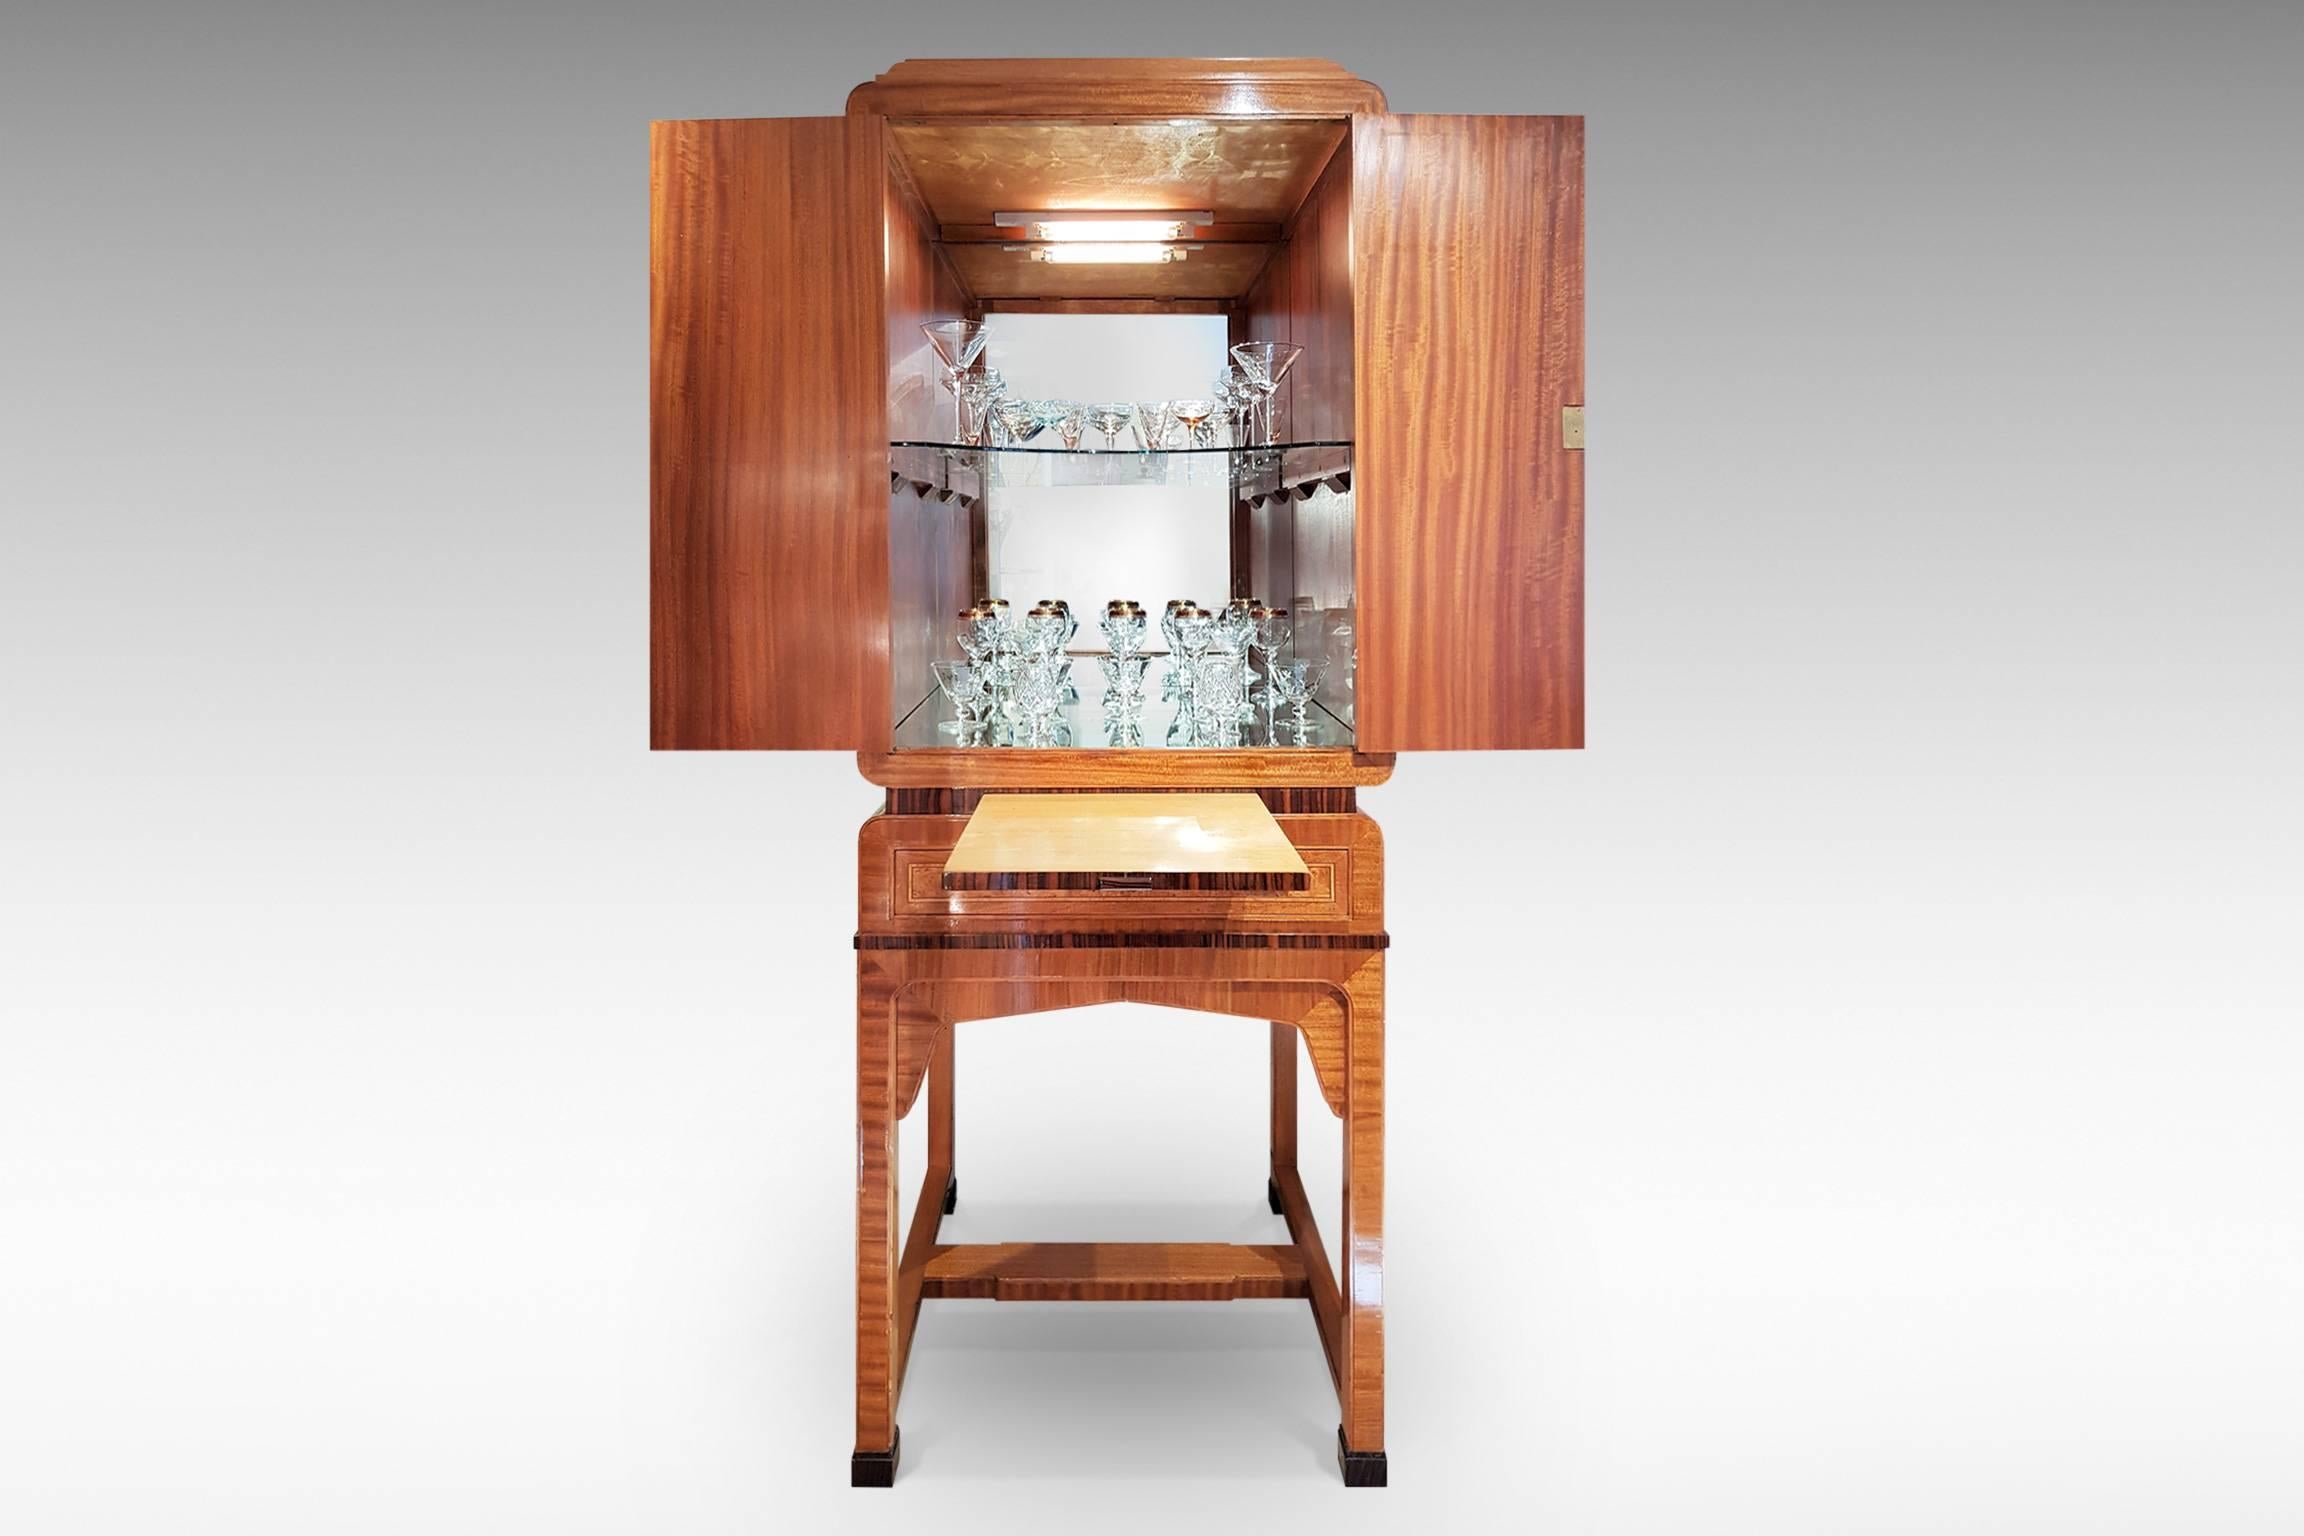 This a superb quality Art Deco cocktail cabinet with veneers and banding in burr walnut, satinwood, mahogany, Macassar ebony and others. It has a mirrored and illuminated interior with glass shelf, together with a pull-out shelf and drawer below.